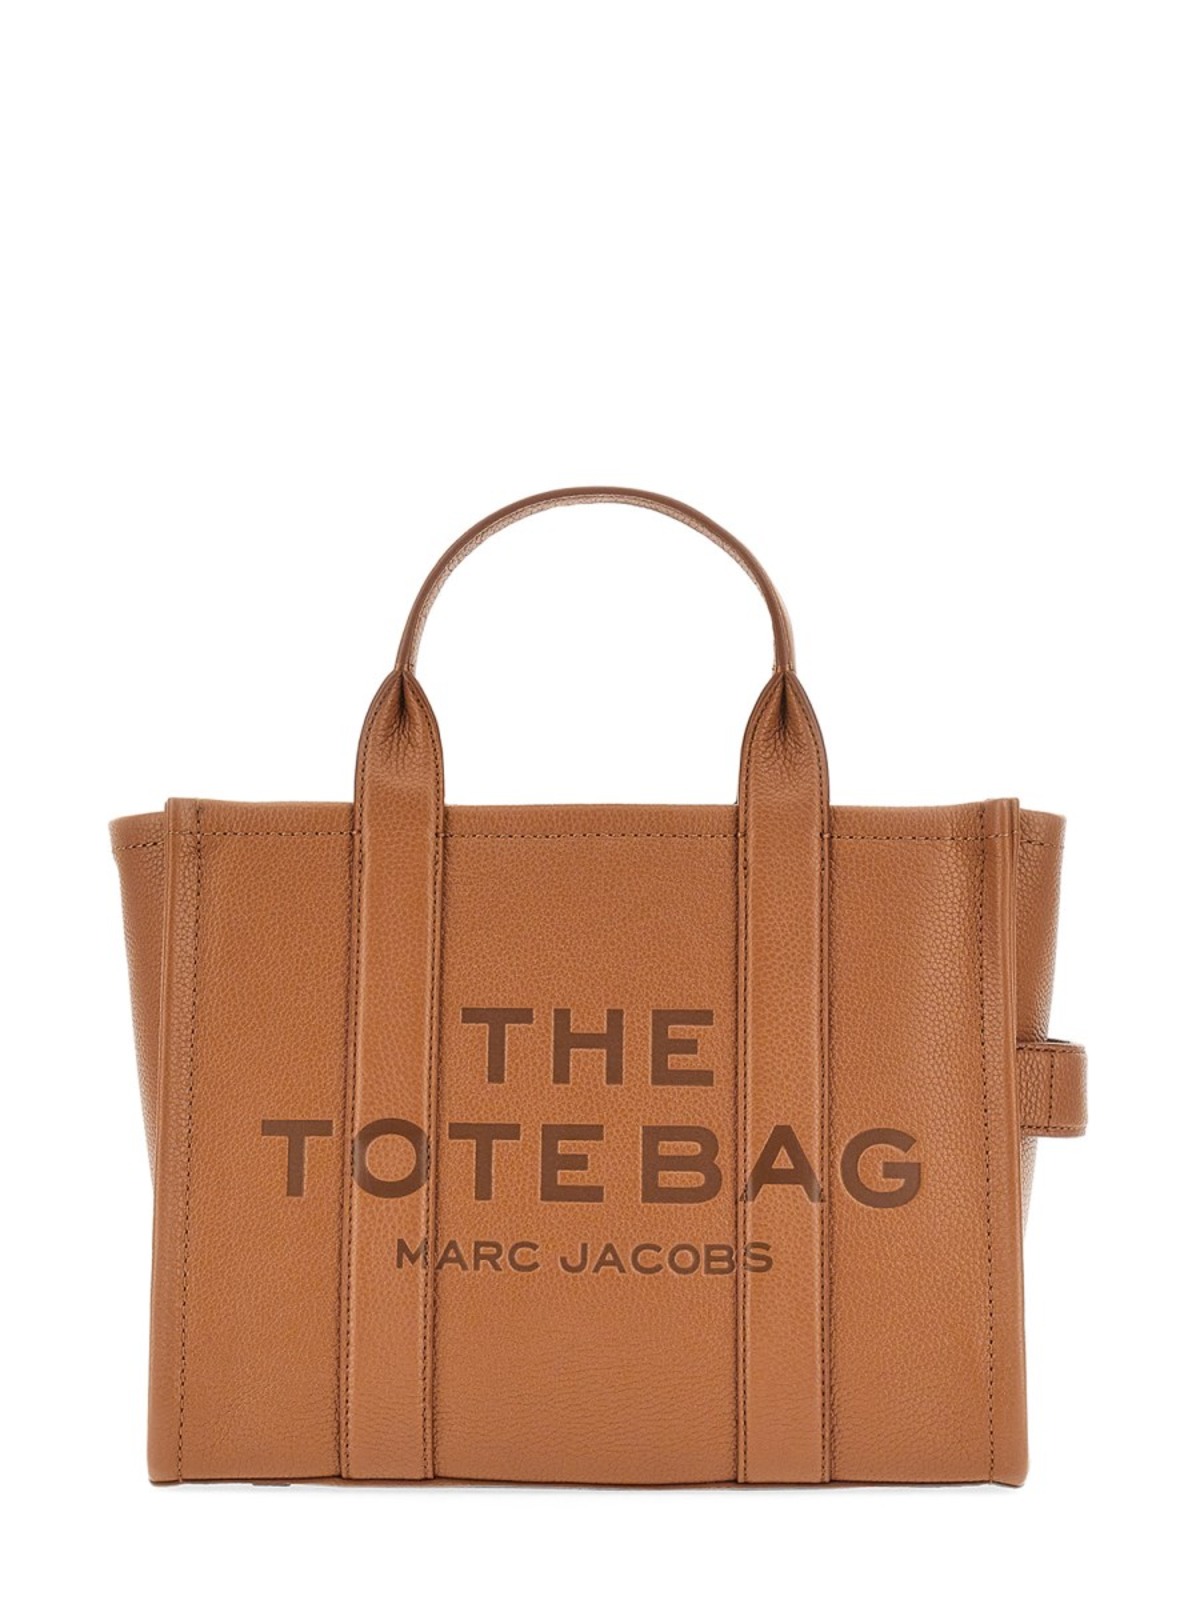 MARC JACOBS THE MEDIUM TOTE LEATHER BAG H004L01PF21_212 109414 | BASE百貨店